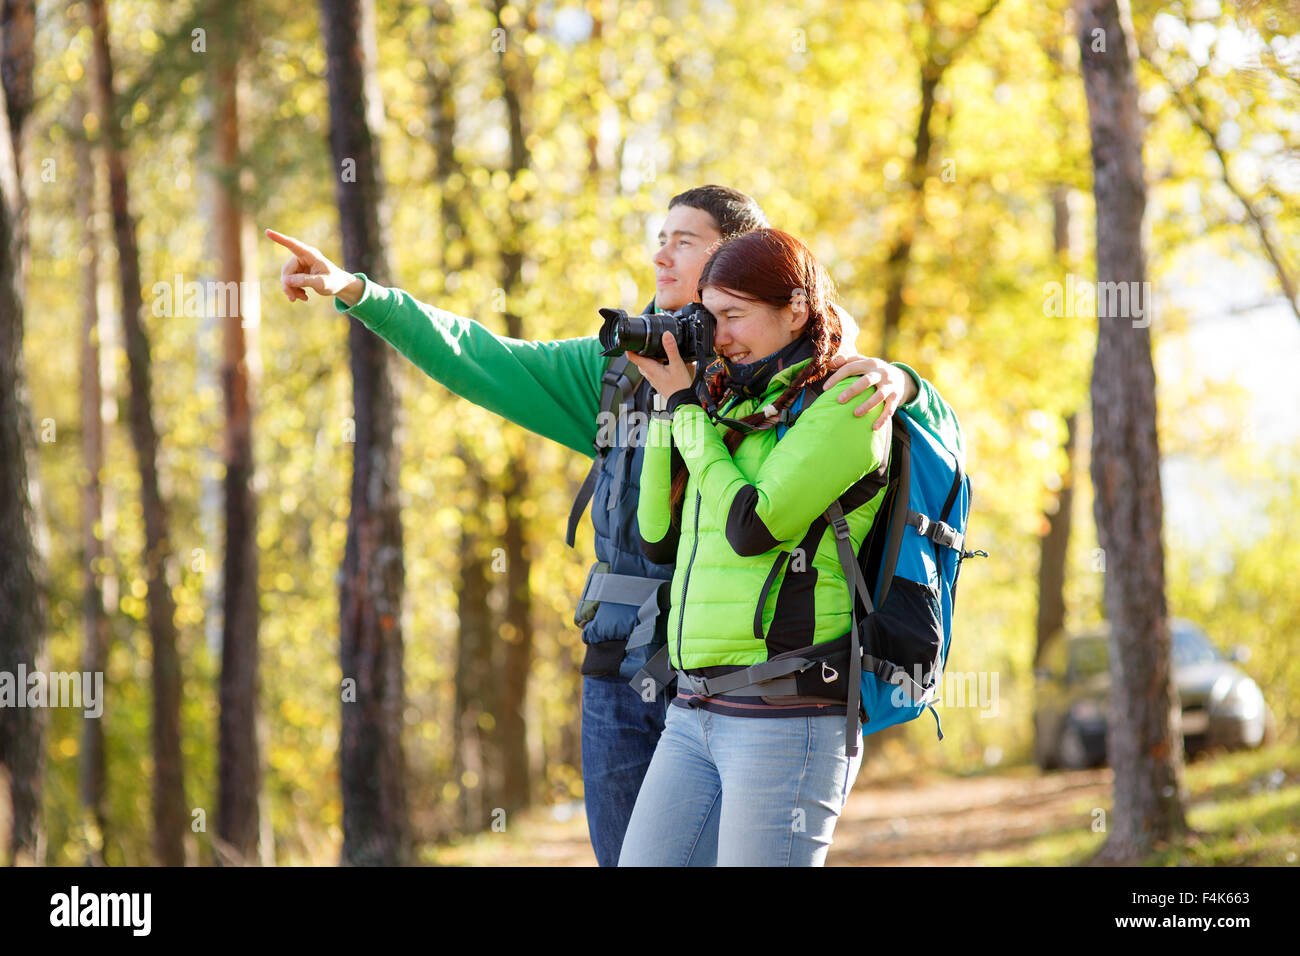 woman photographer takes pictures Stock Photo